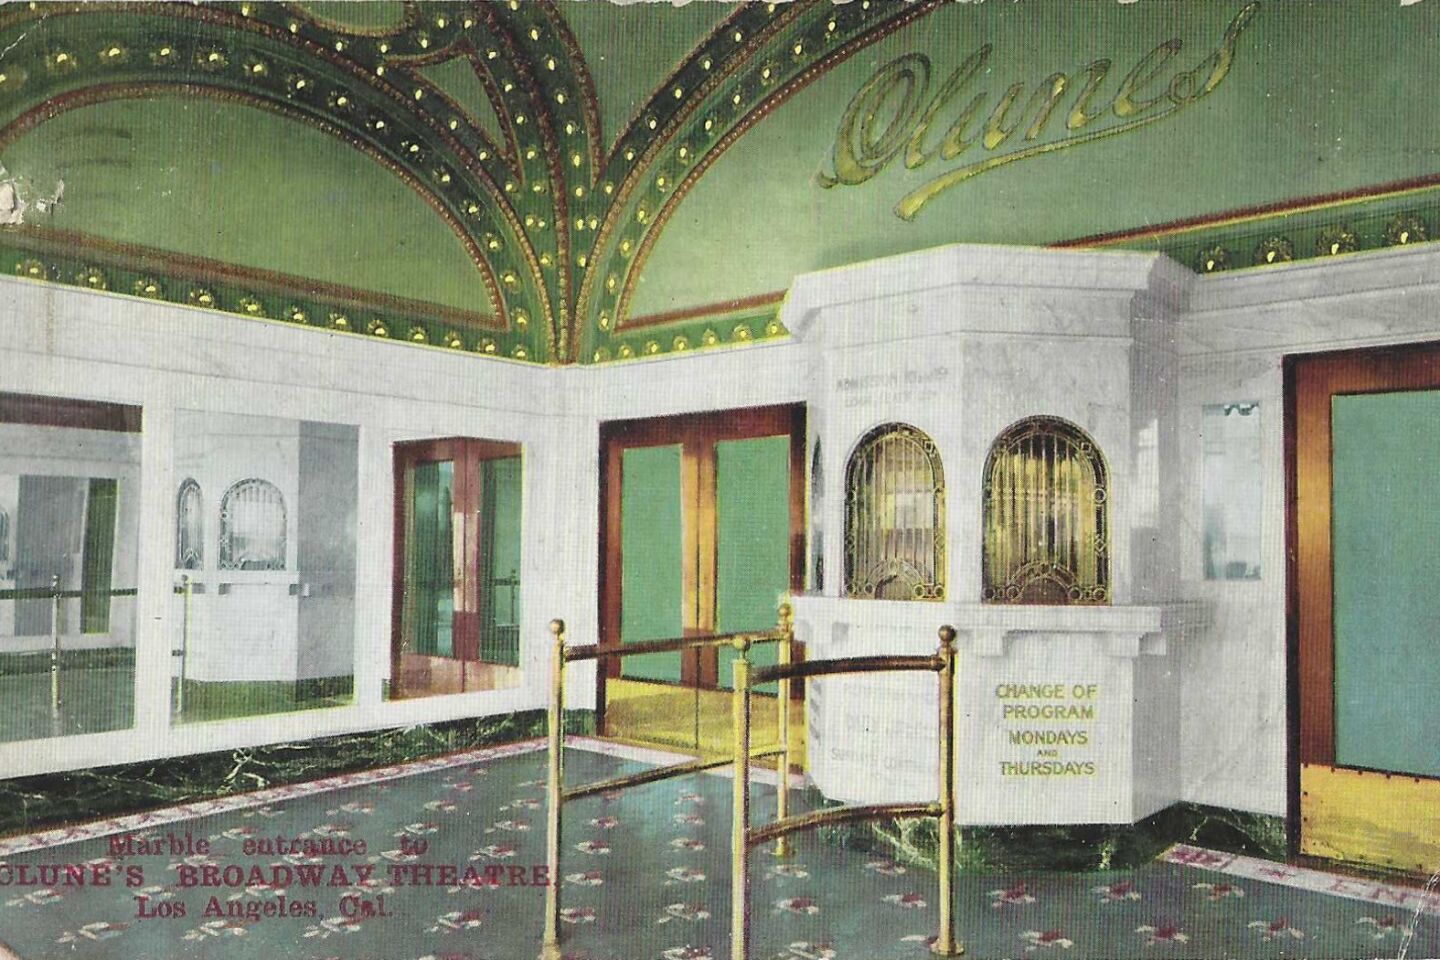 Vintage postcard depicts the marbled, gleaming entrance to an L.A. movie theater